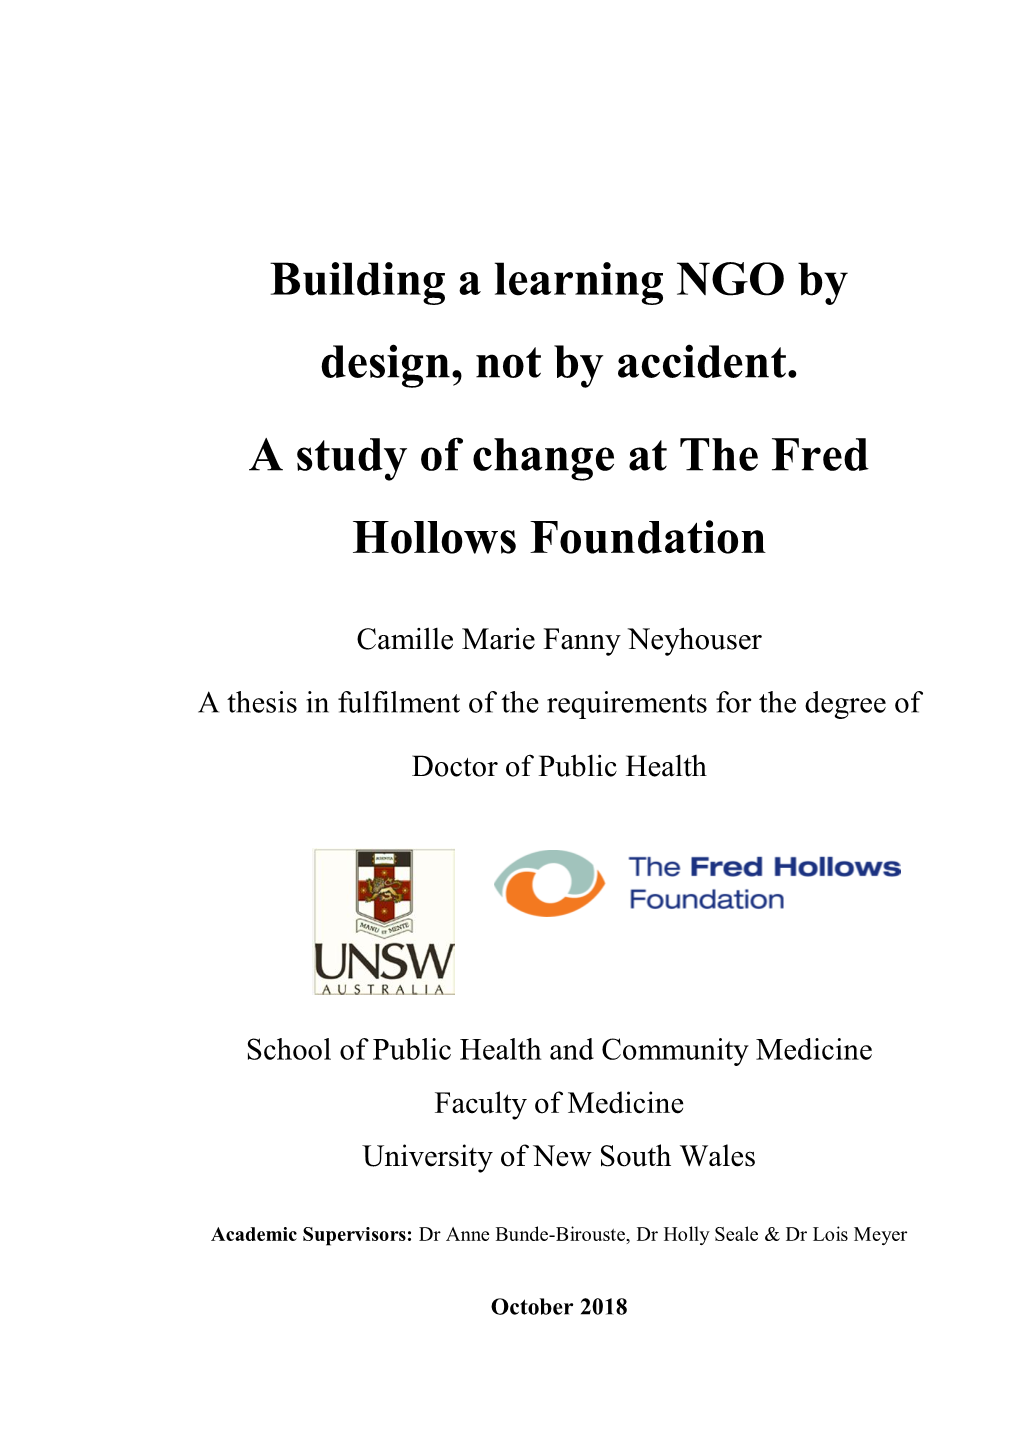 Building a Learning NGO by Design, Not by Accident. a Study of Change at the Fred Hollows Foundation